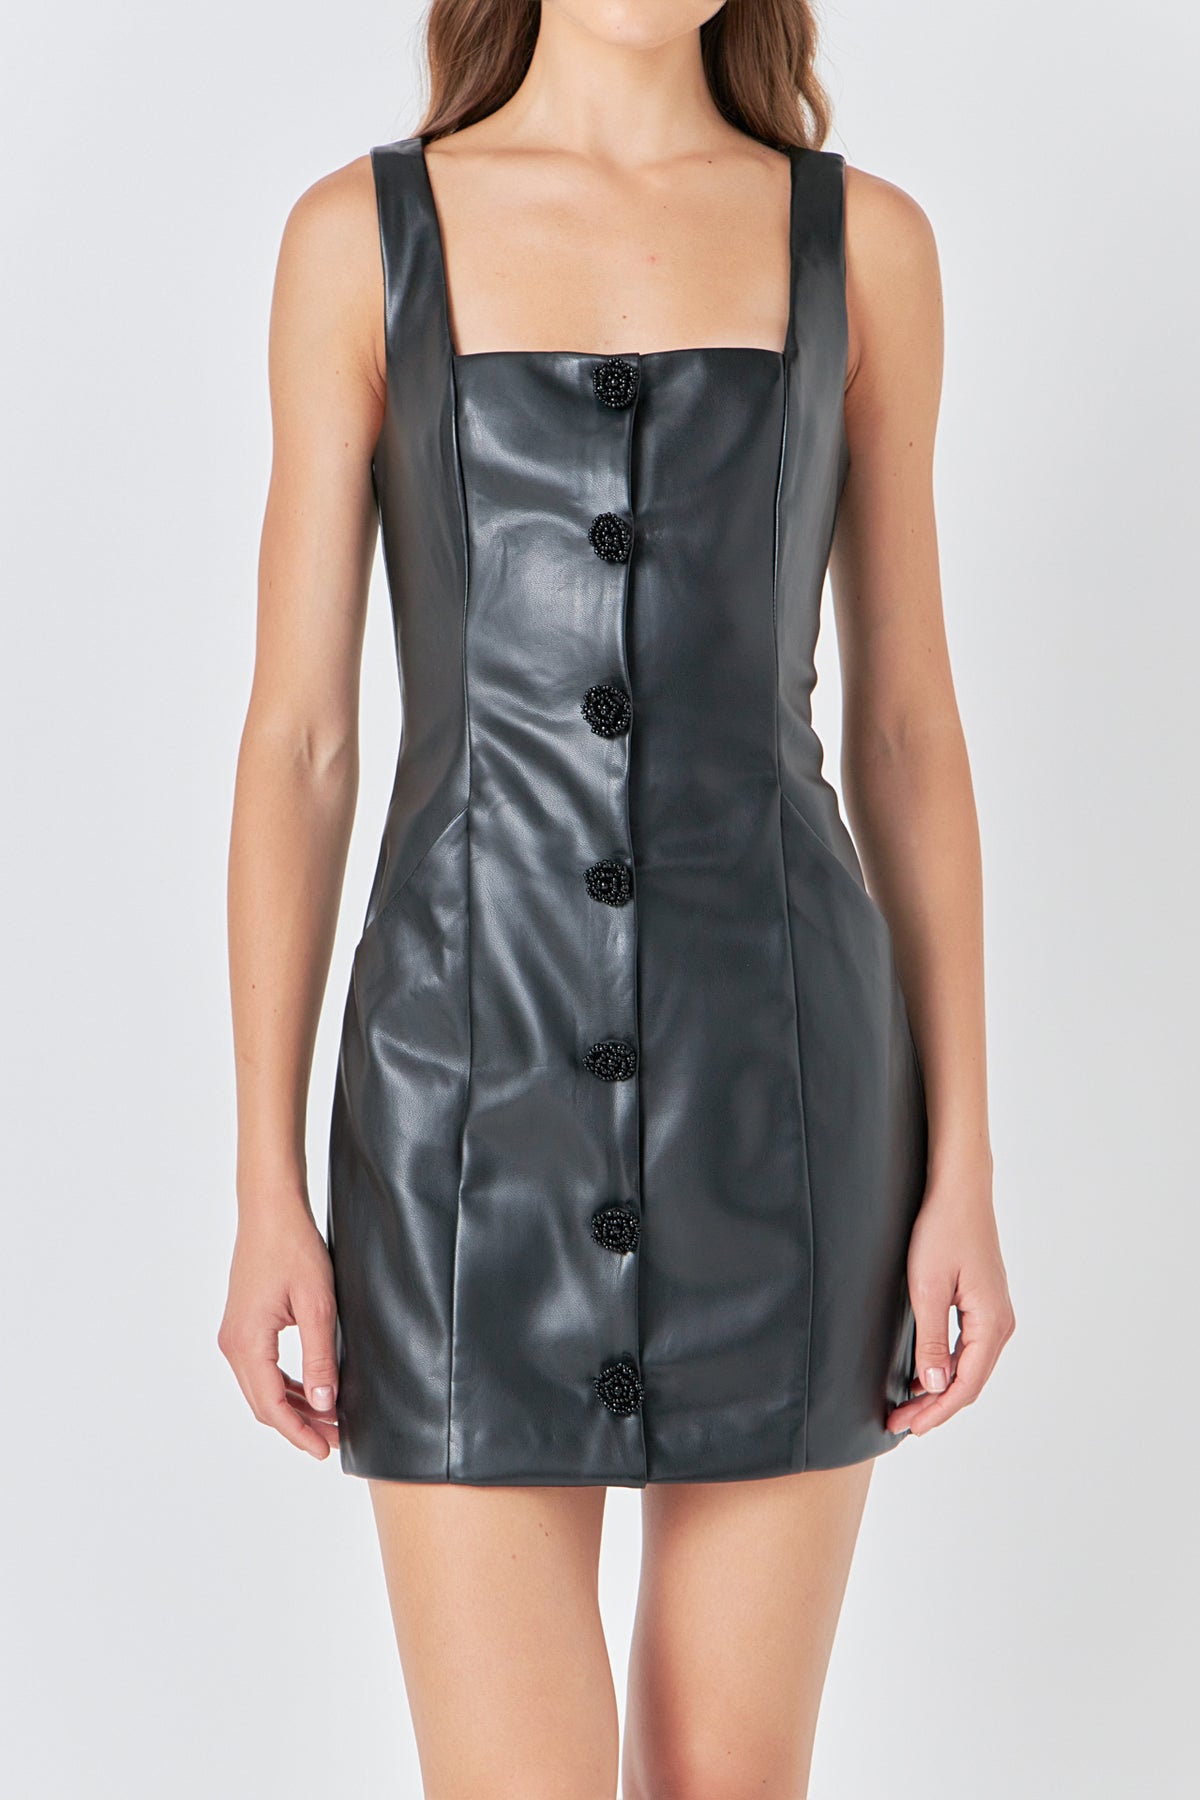 ENDLESS ROSE - Faux Leather Buttoned Mini Dress - DRESSES available at Objectrare